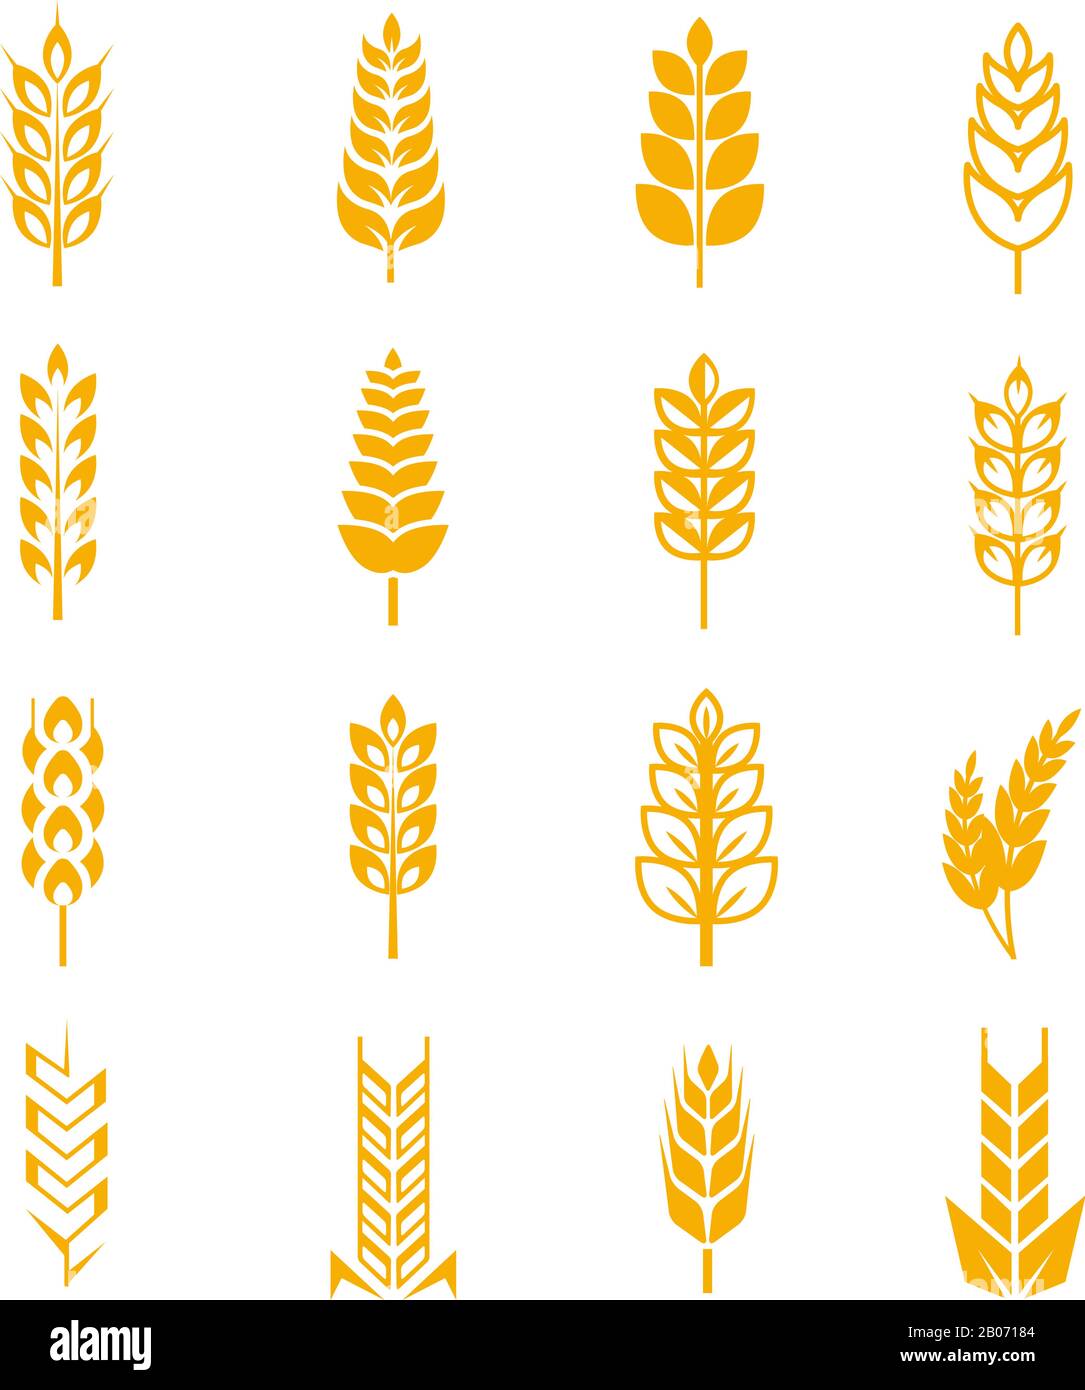 Wheat ears bread vector symbols. Harvest grain and wheat, cereal rye illustration Stock Vector